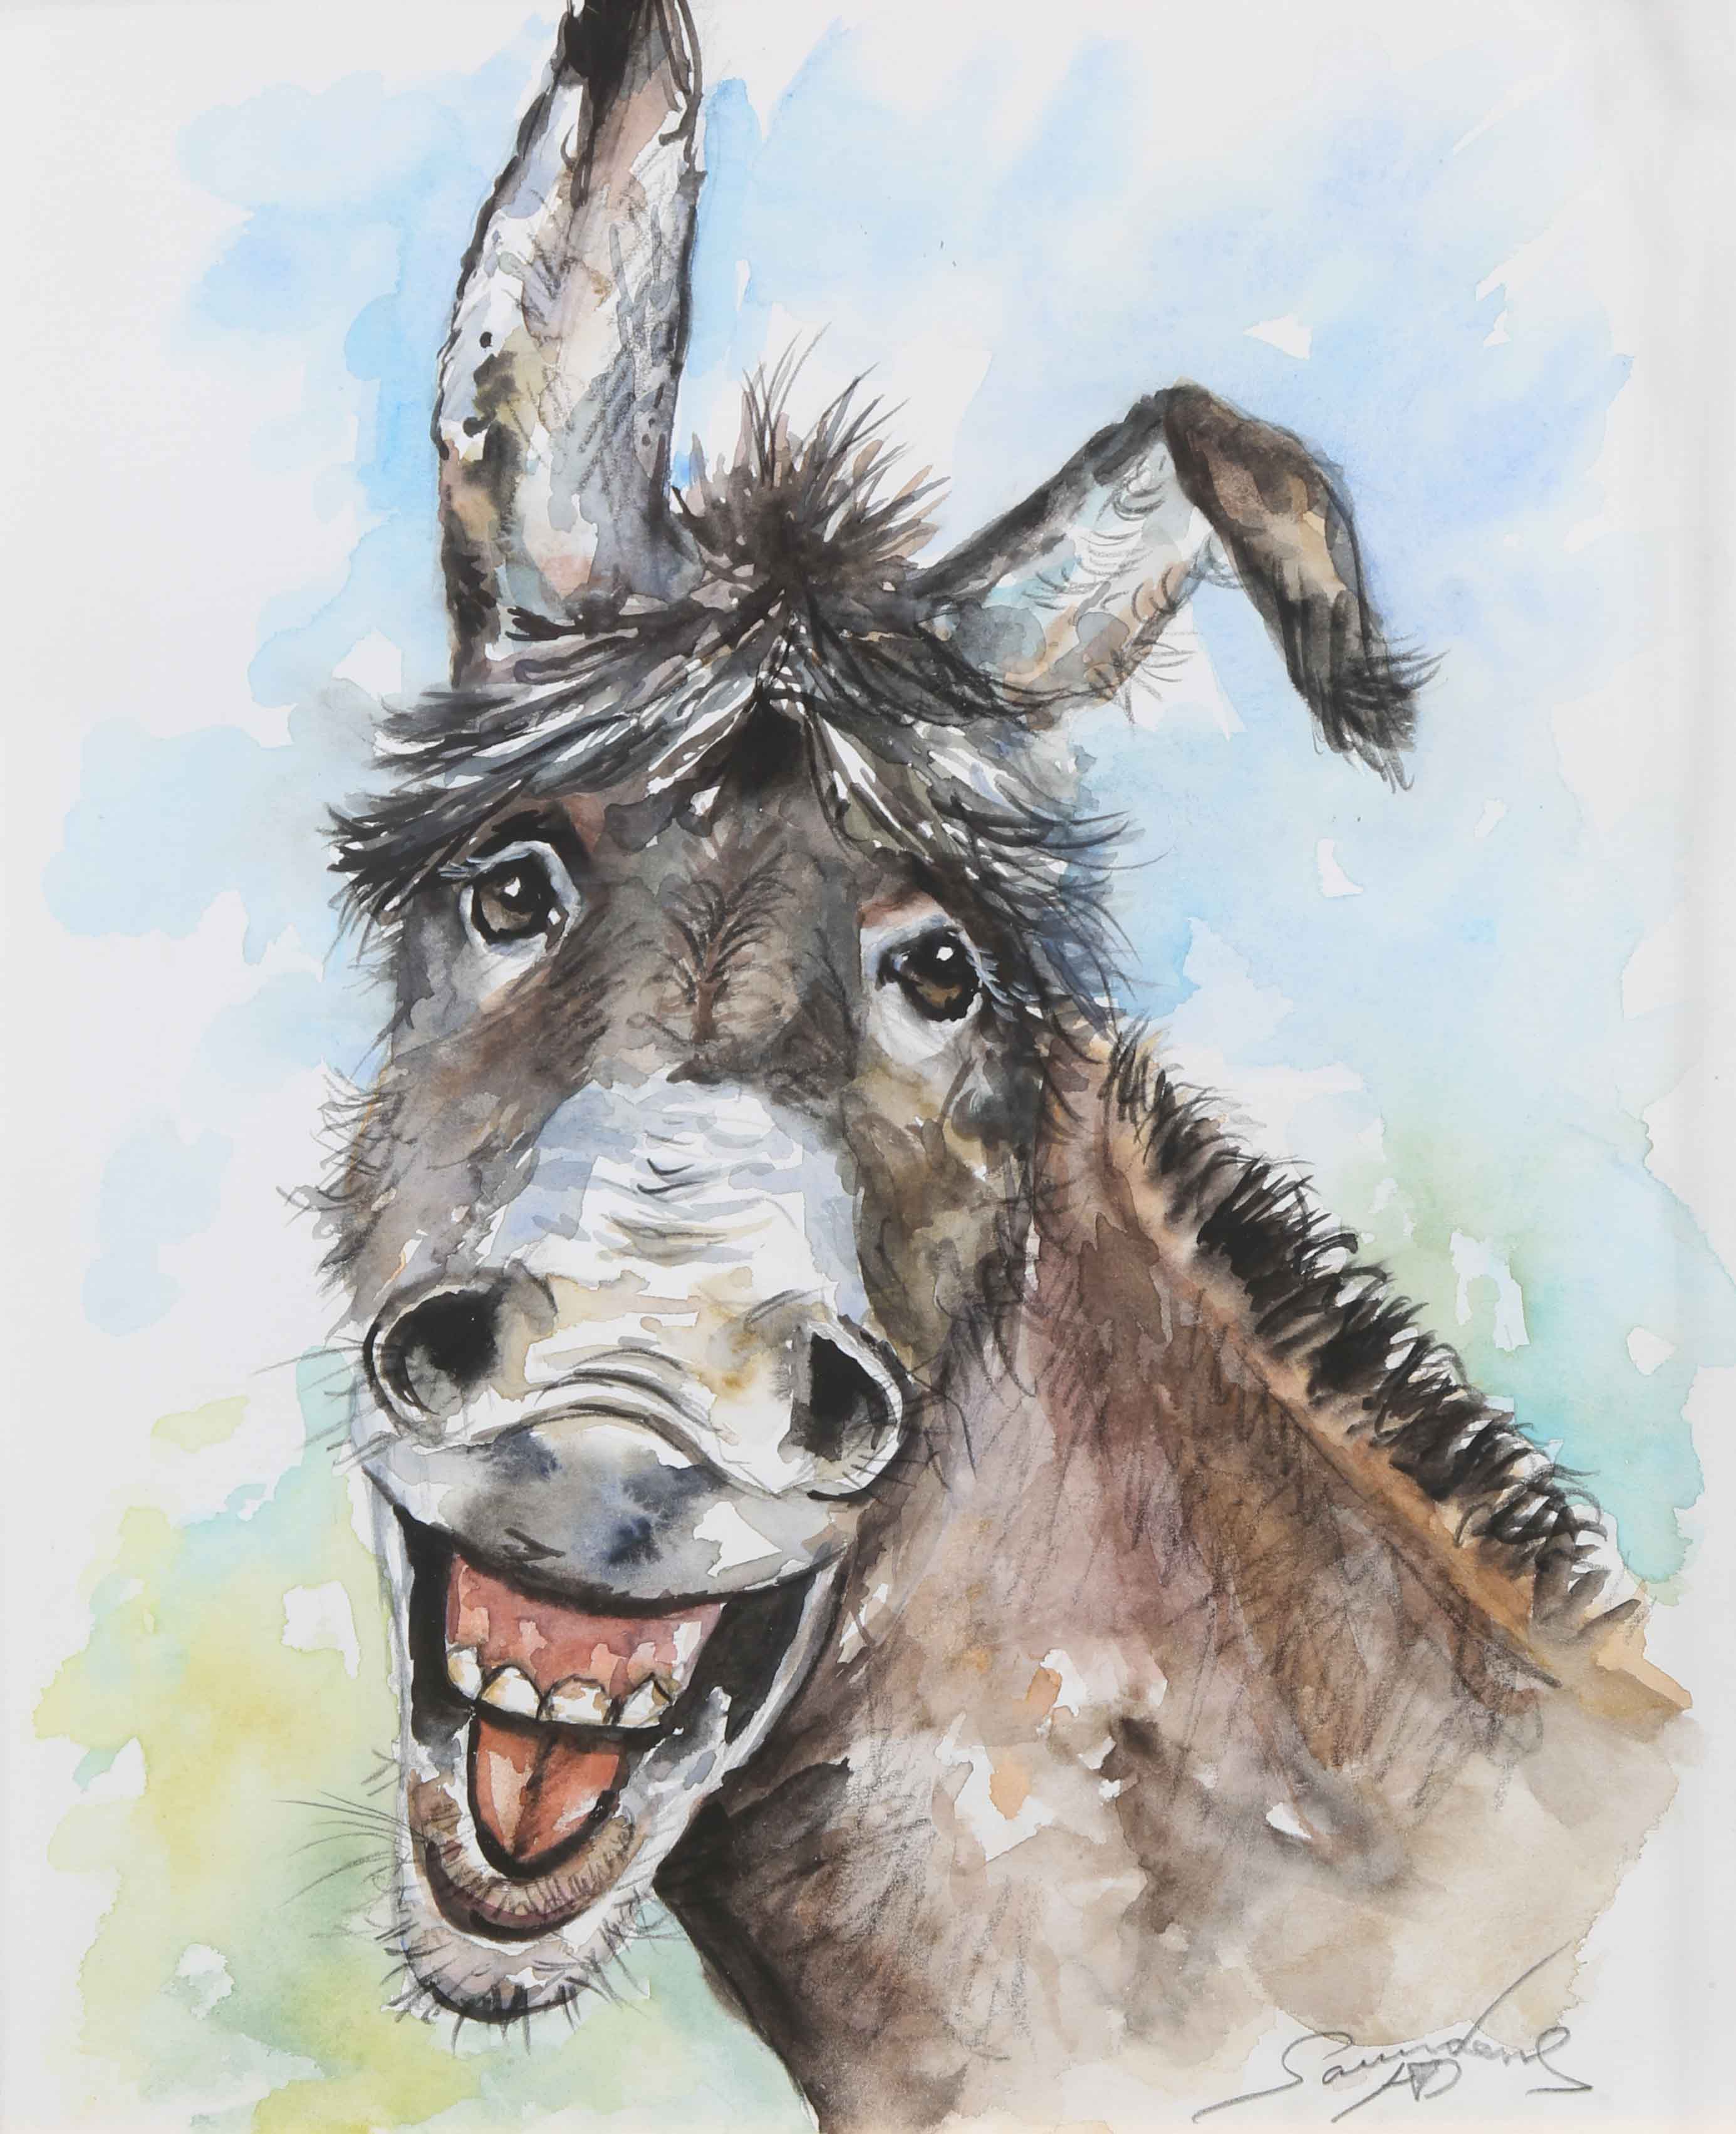 HAPPY CHAPPY - ANDY SAUNDERS - WATERCOLOUR - 8 X 10